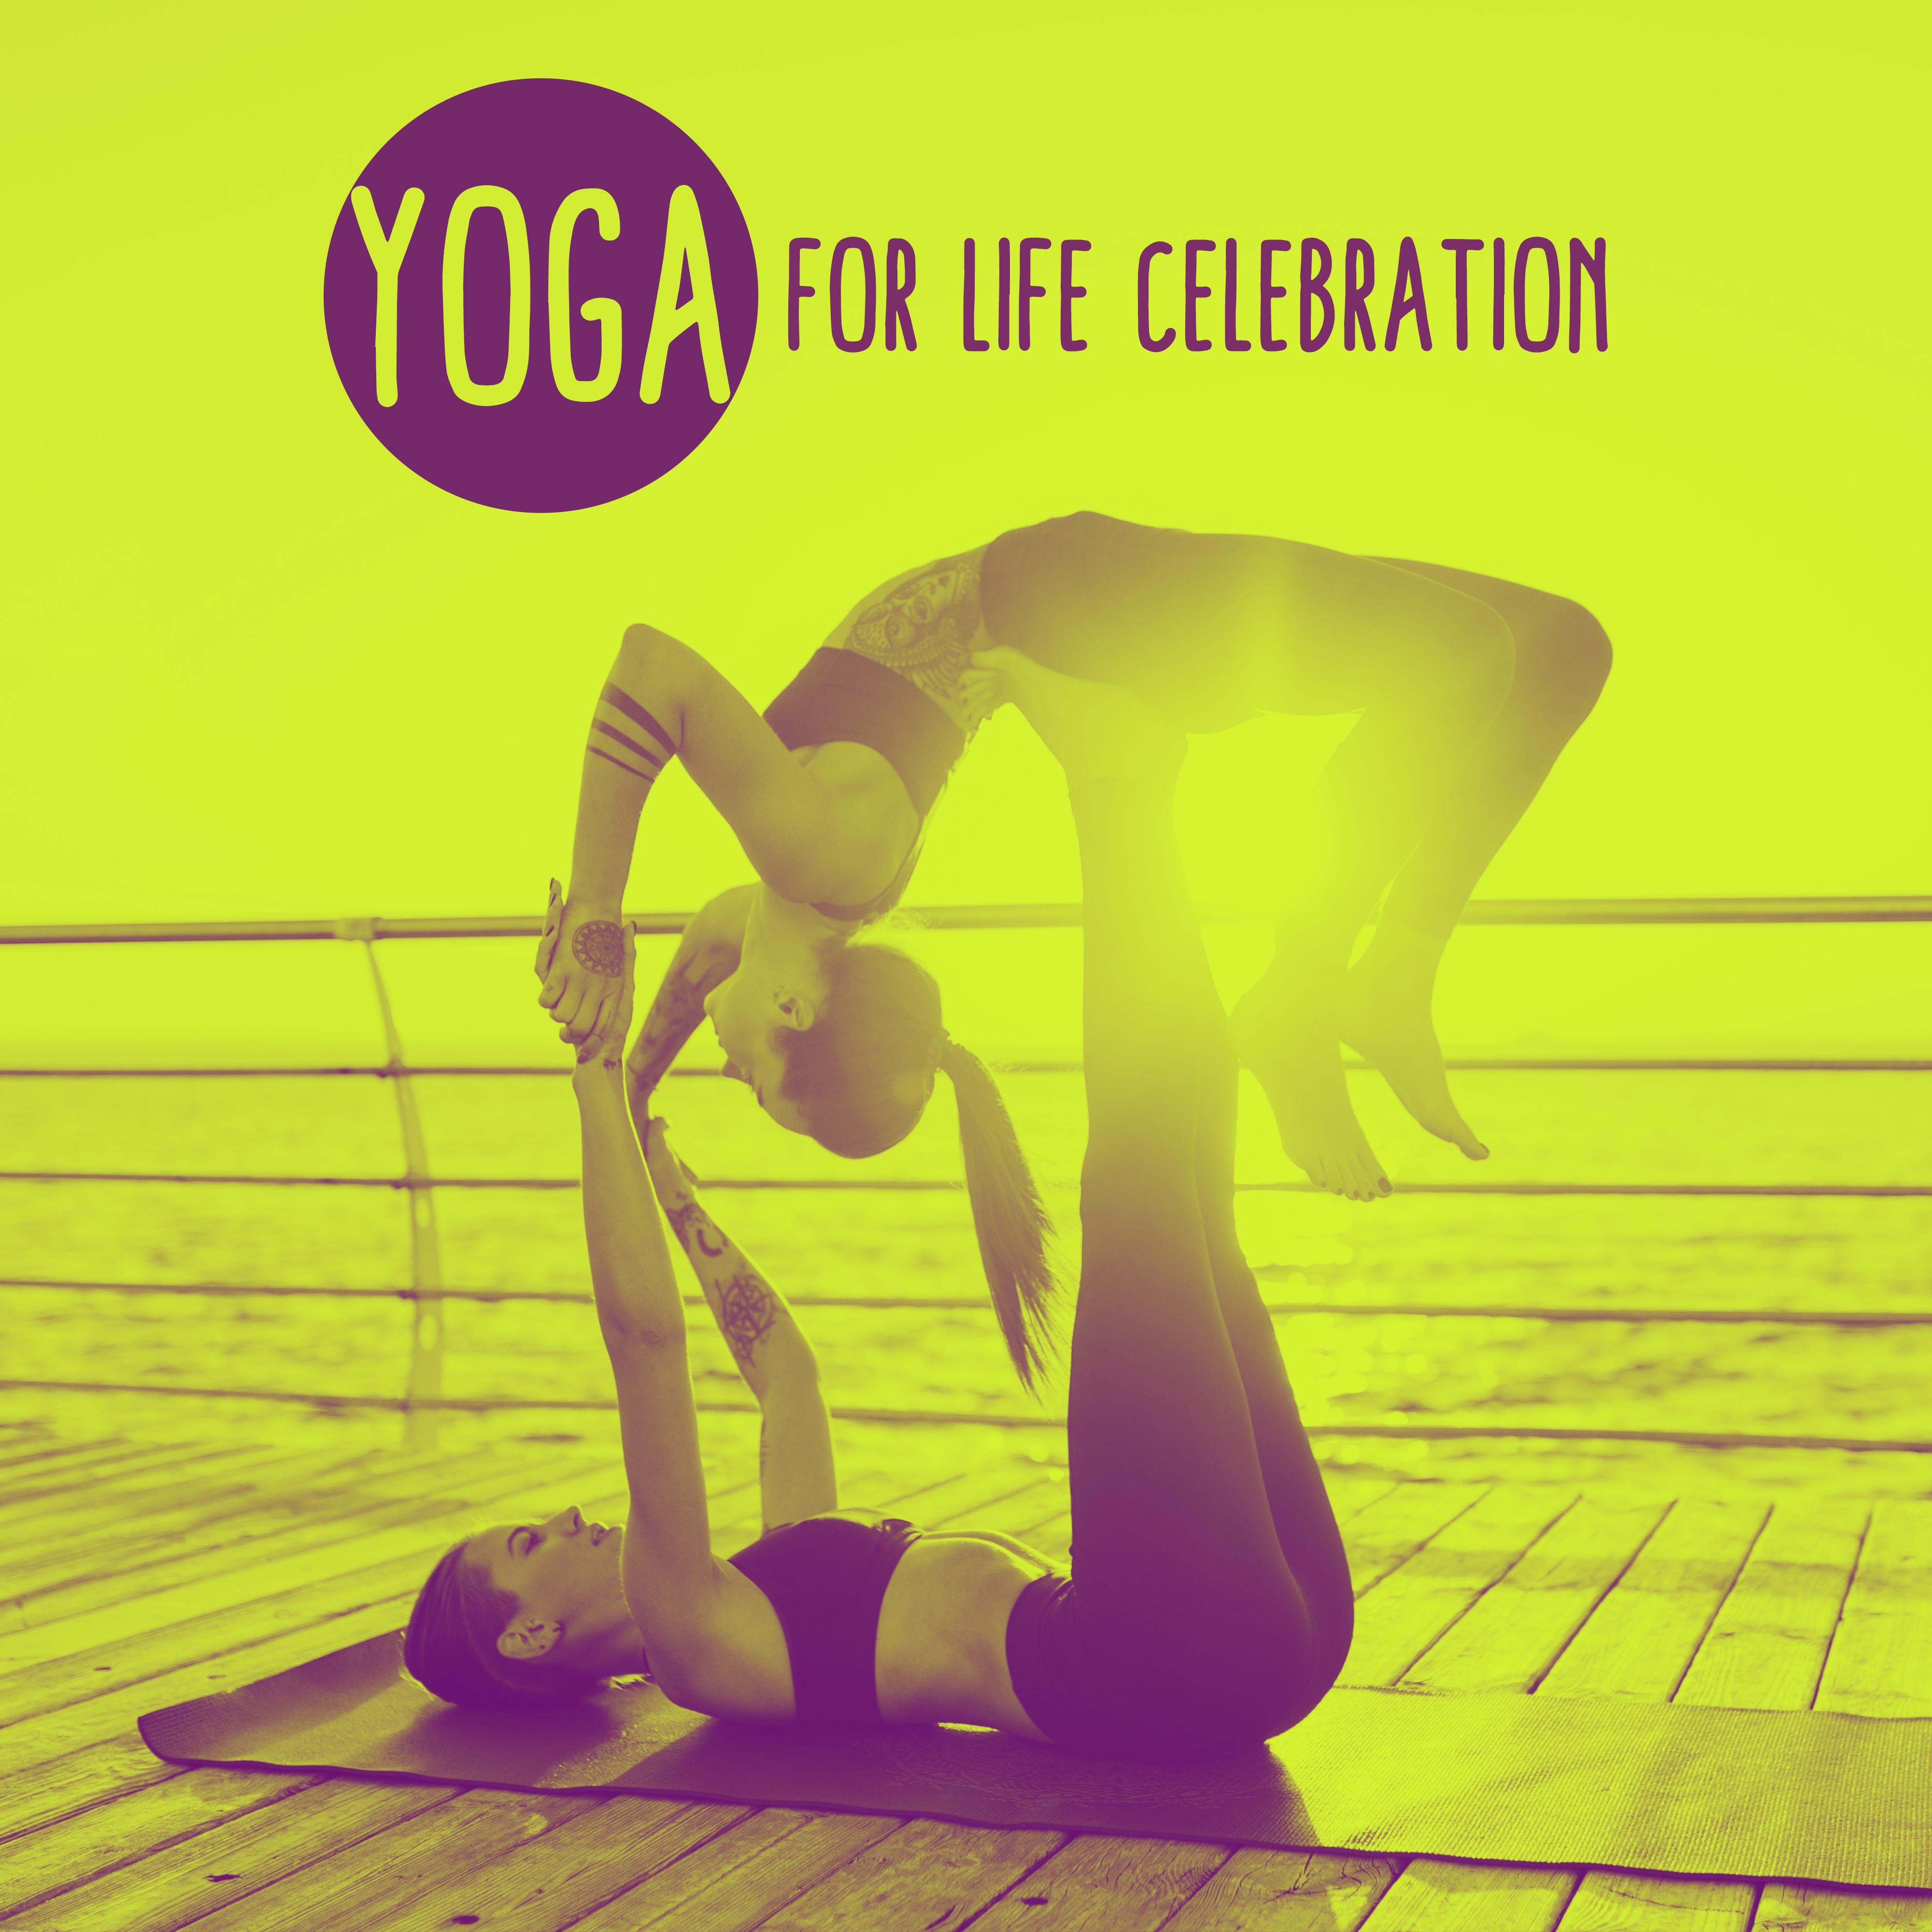 Yoga for Life Celebration: 2019 New Age Ambient Music Mix for Deep Meditation & Relaxation, Zen, Mantra, Inner Harmony, Life Energy Increase